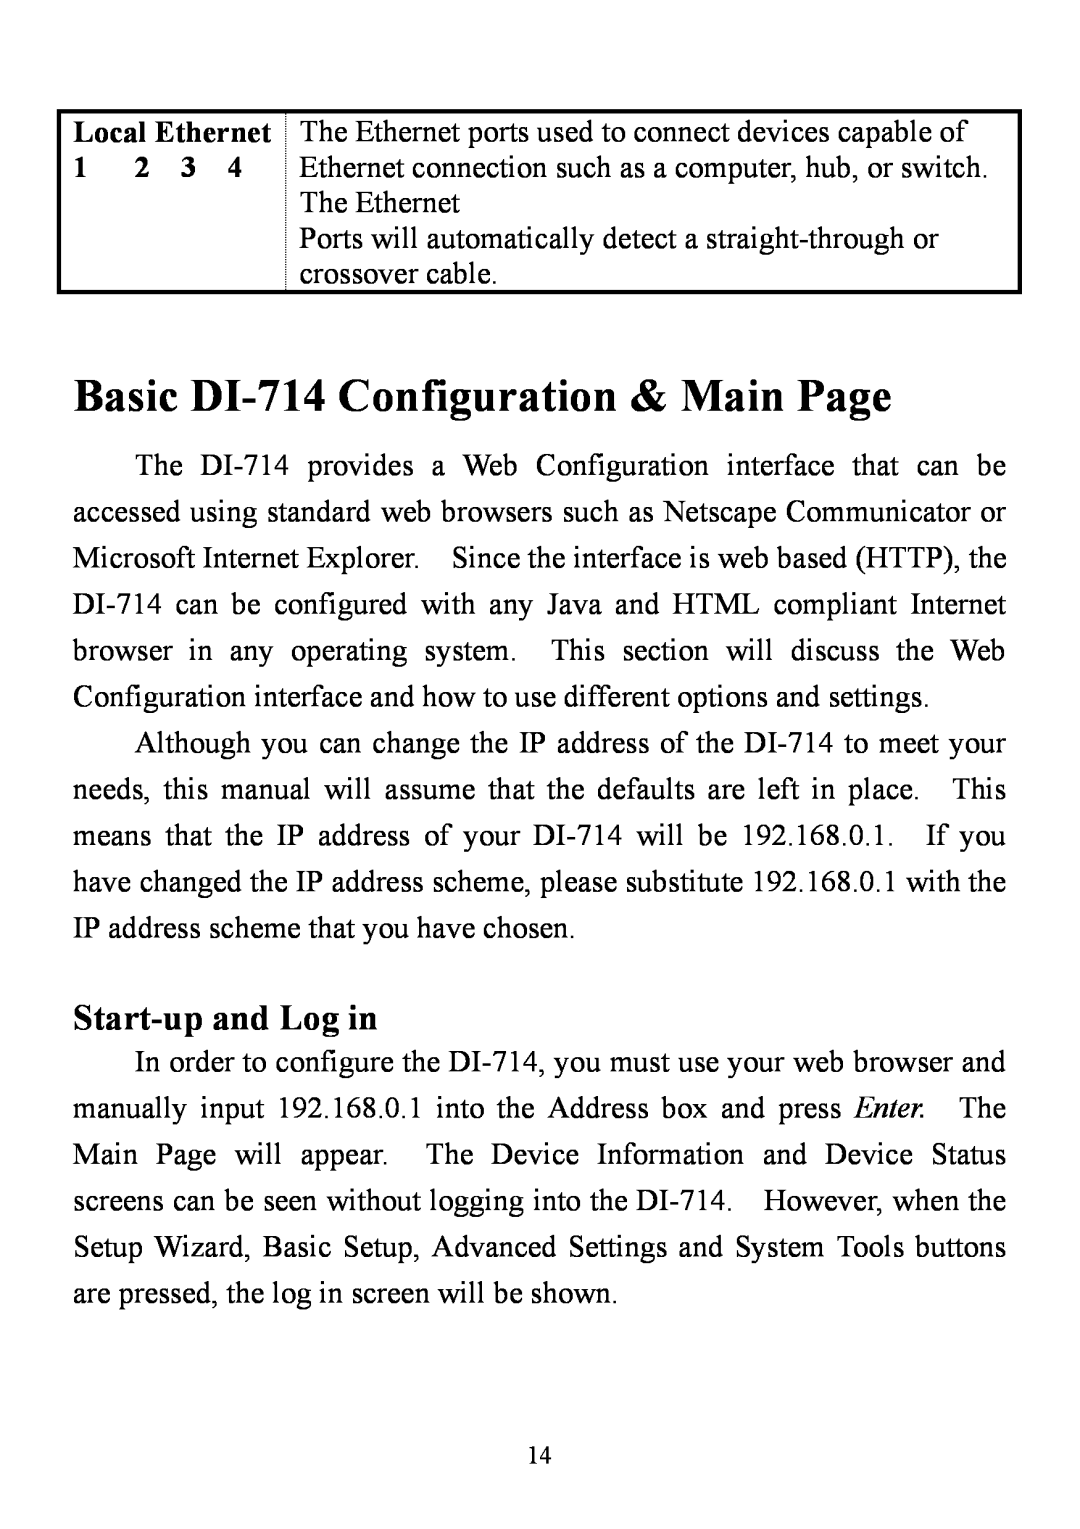 D-Link user manual Basic DI-714 Configuration & Main Page, Start-up and Log in 